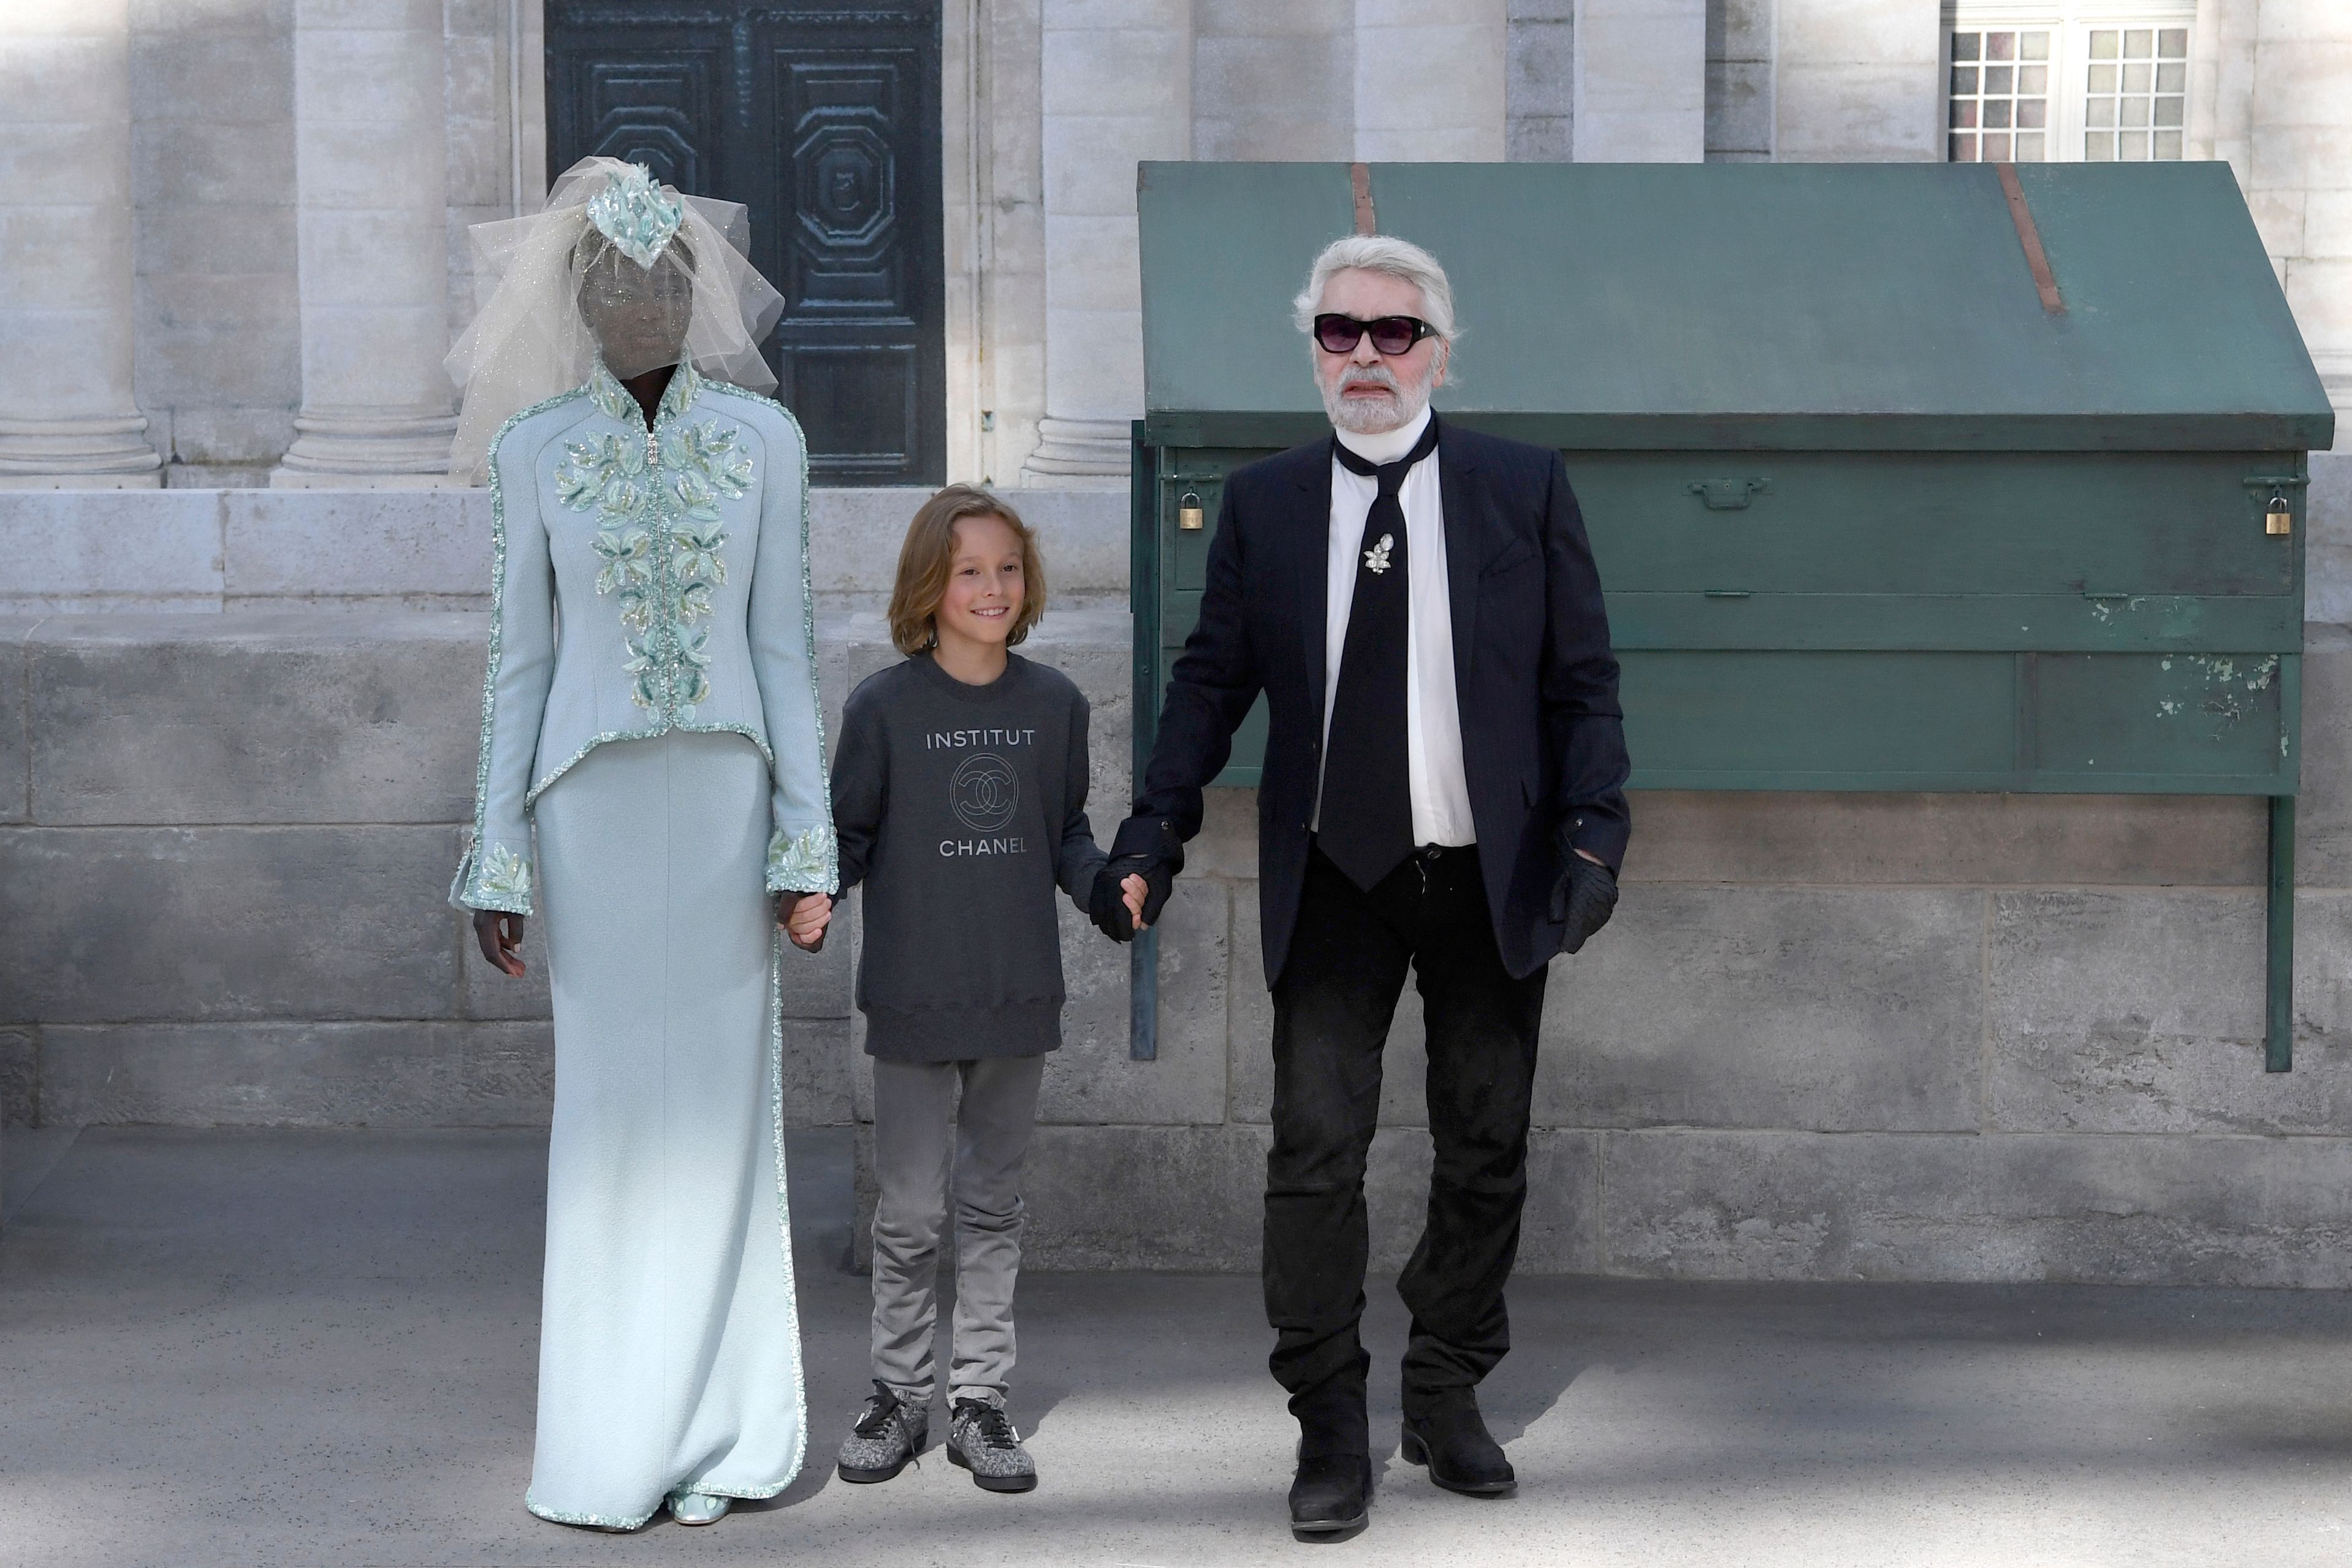 The 1990s Episode 4: Karl Lagerfeld and The Role of Creative Director